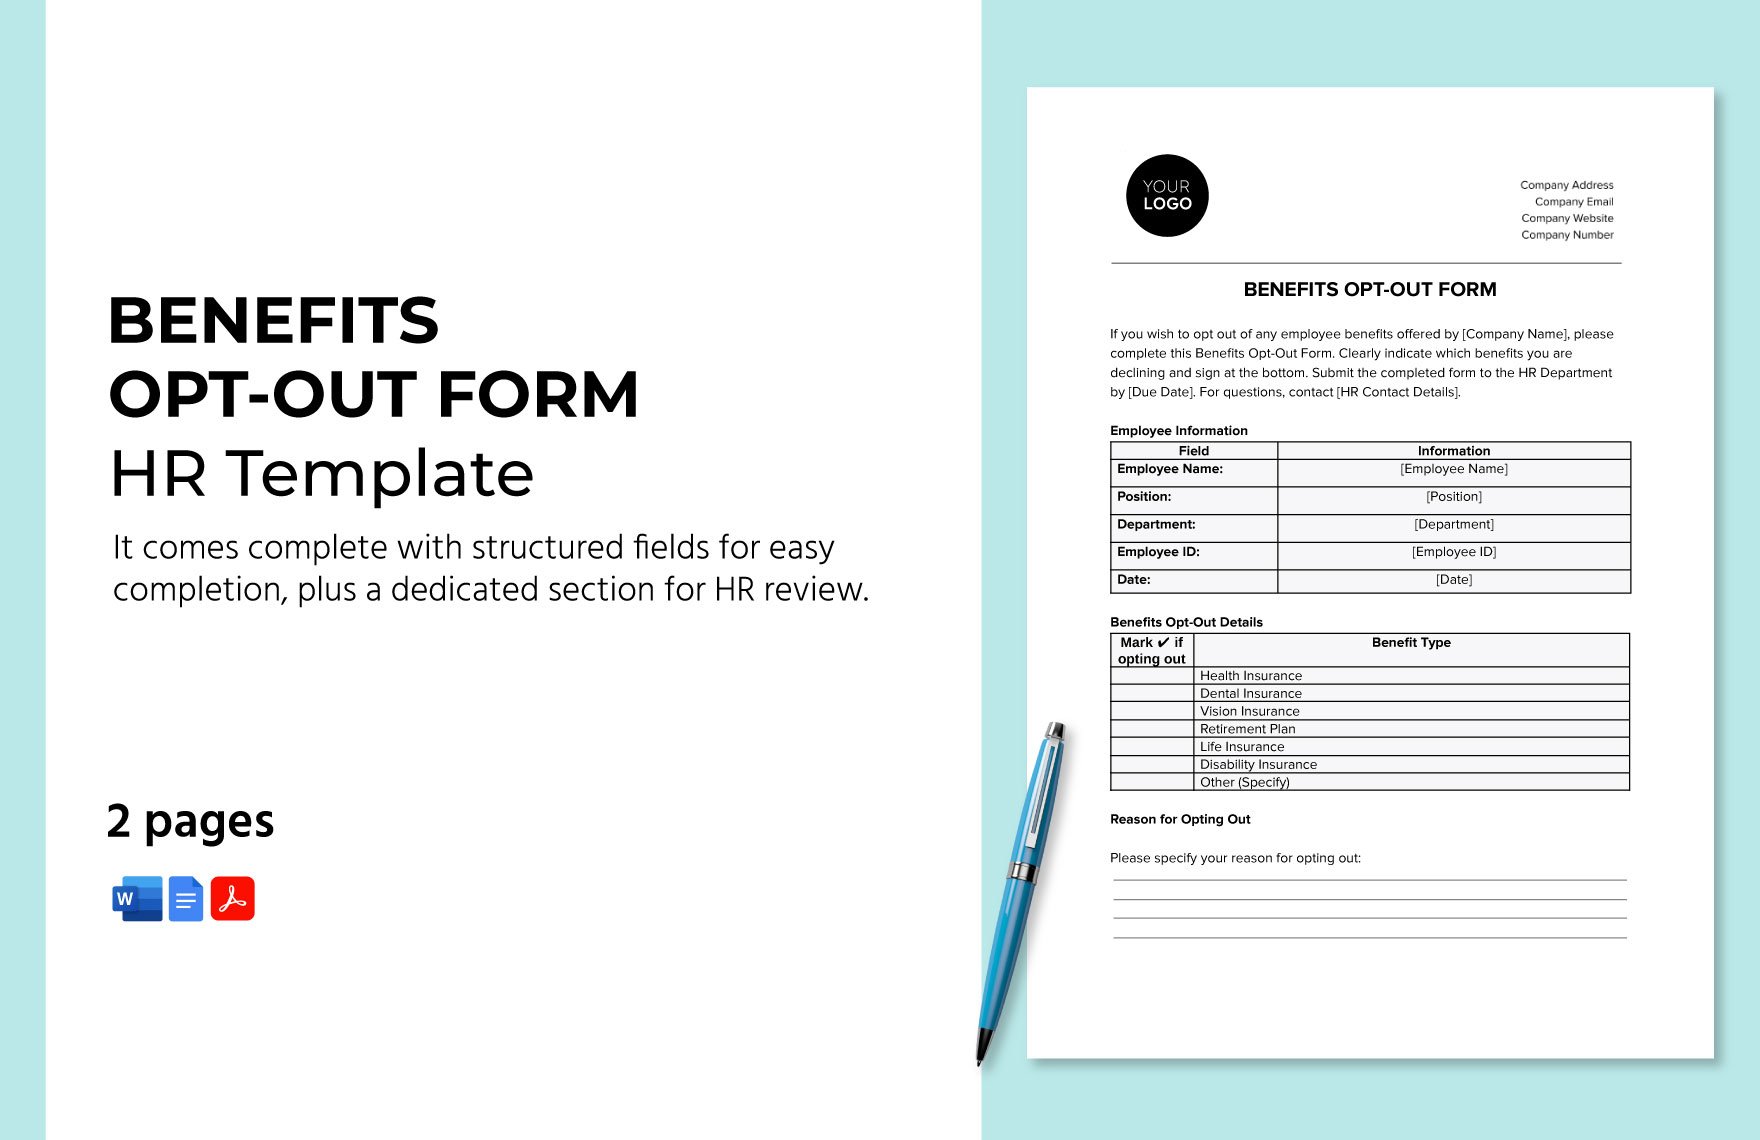 Benefits Opt-out Form HR Template in Word, Google Docs, PDF